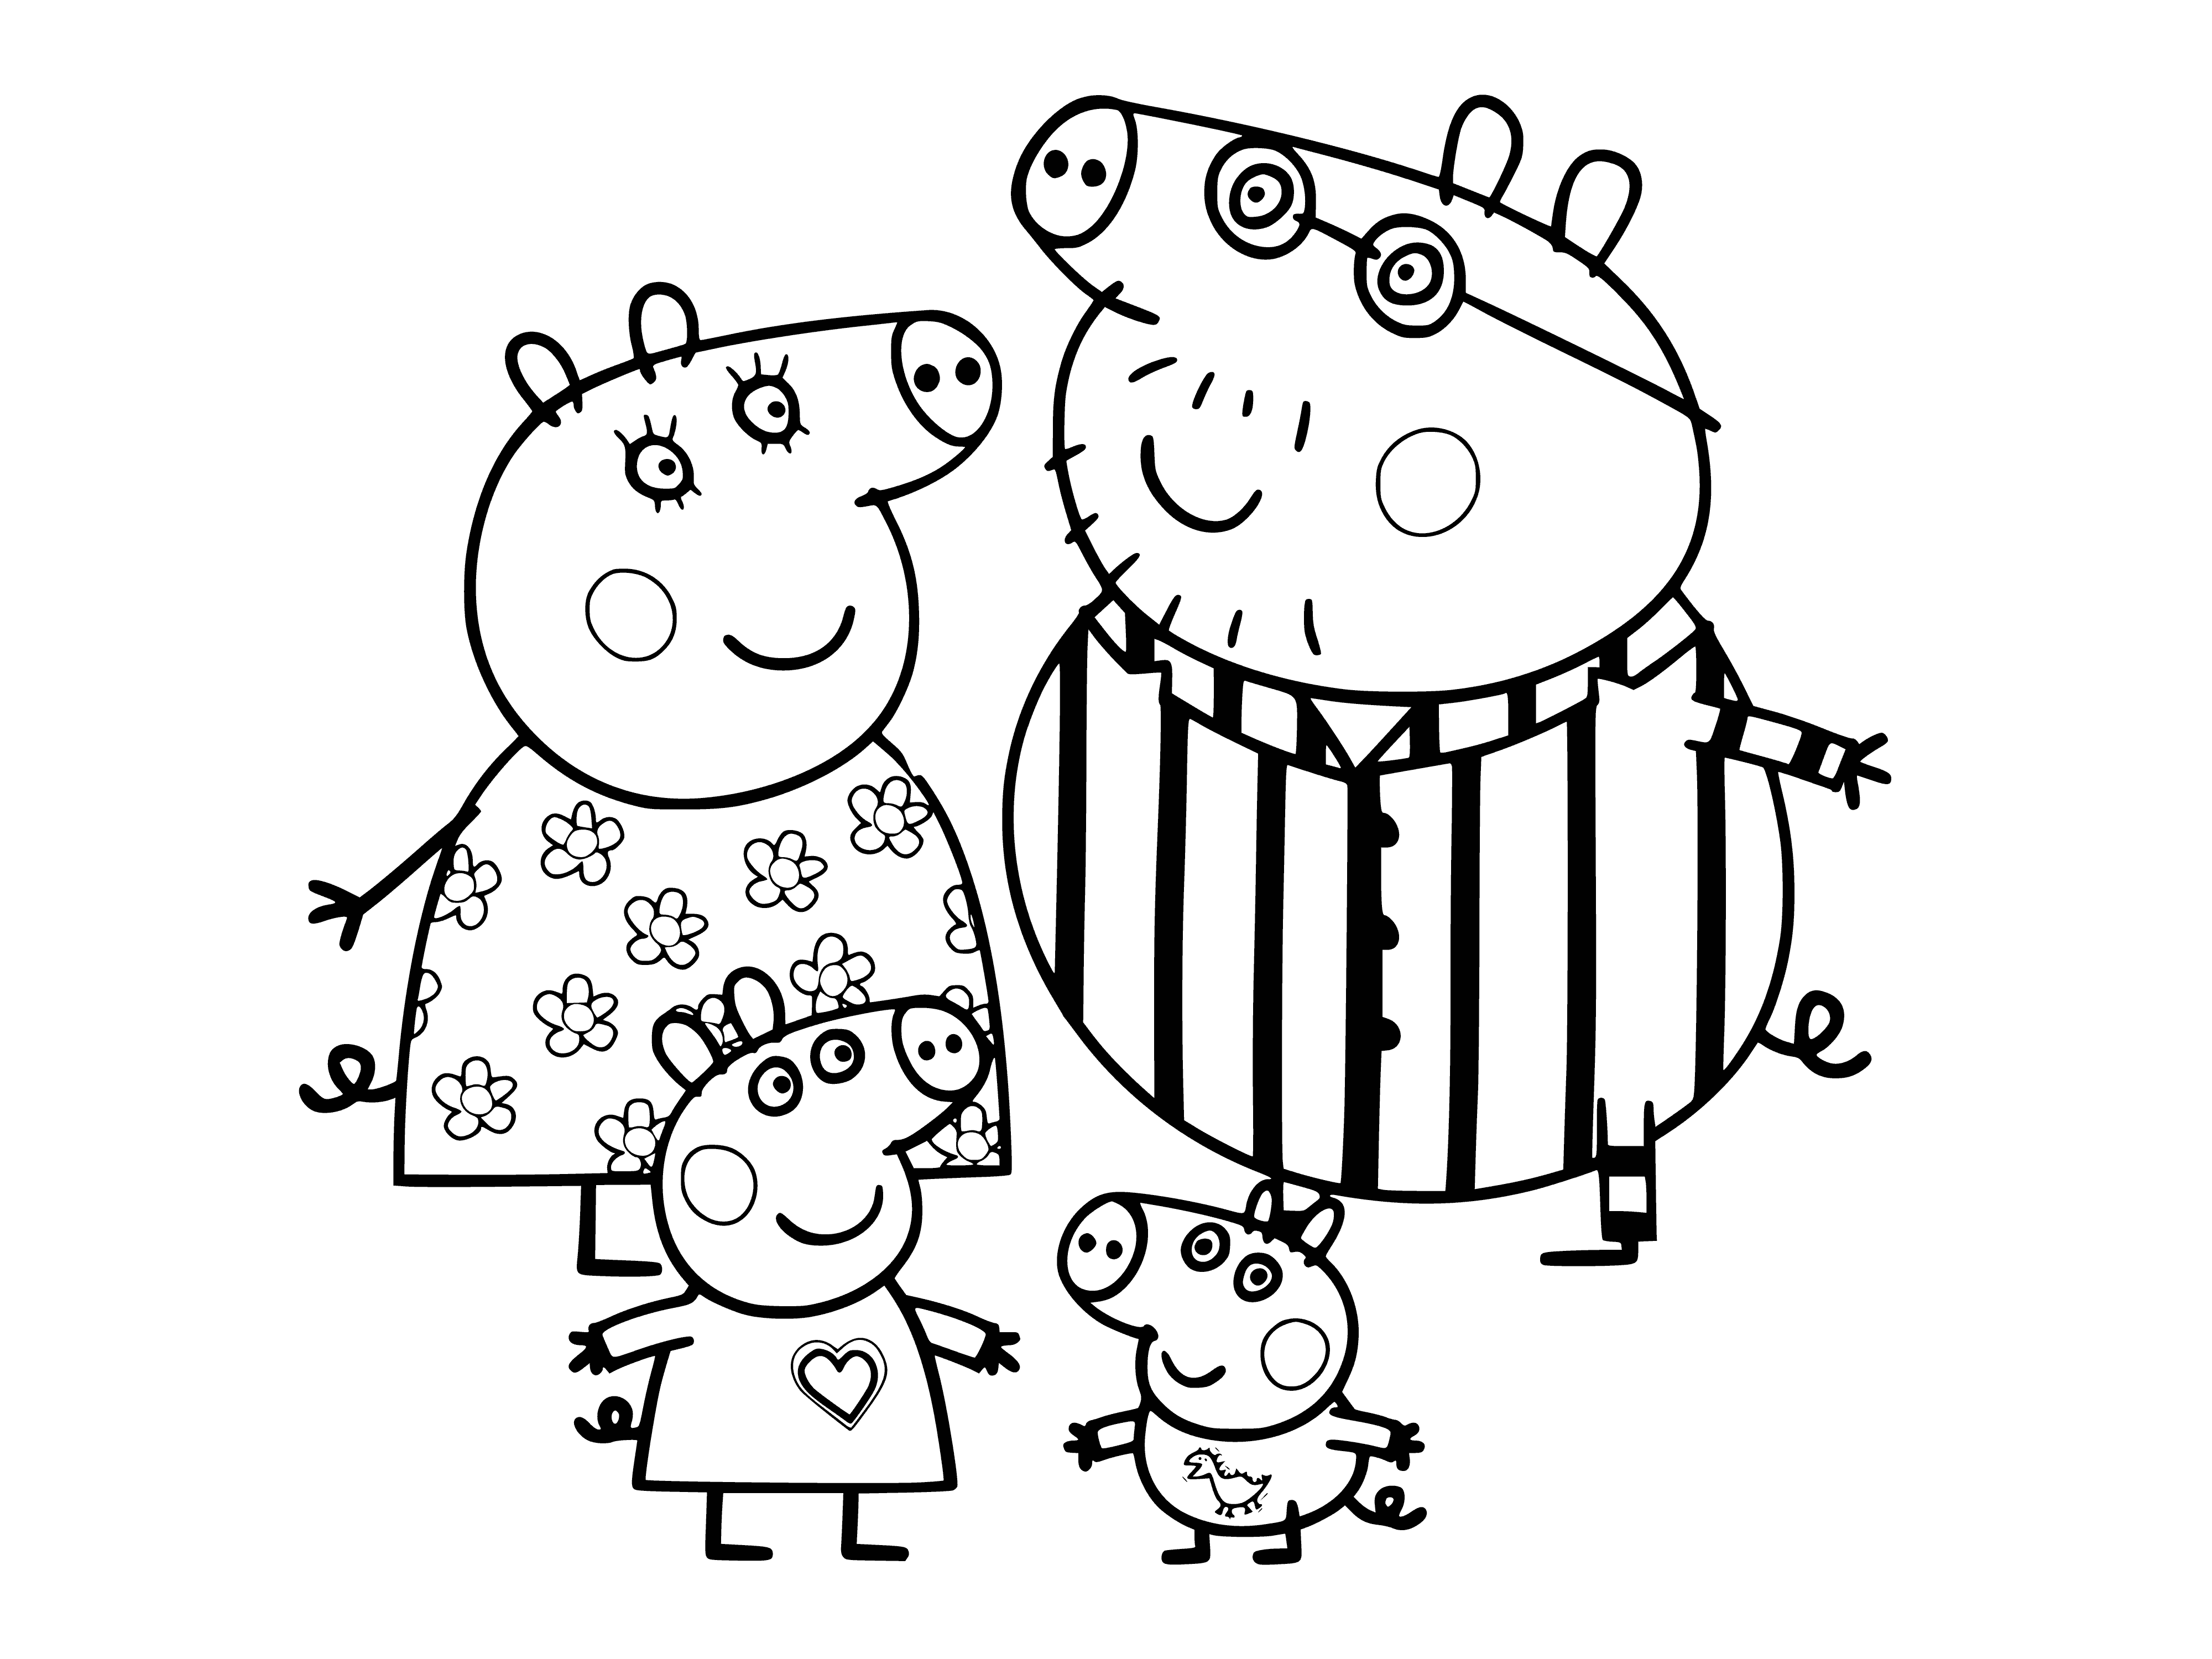 coloring page: A family of four pigs, with pink skin and brown hair, have large, white house and red bag. Children smiling, parents happy, all excited. #pigfamily